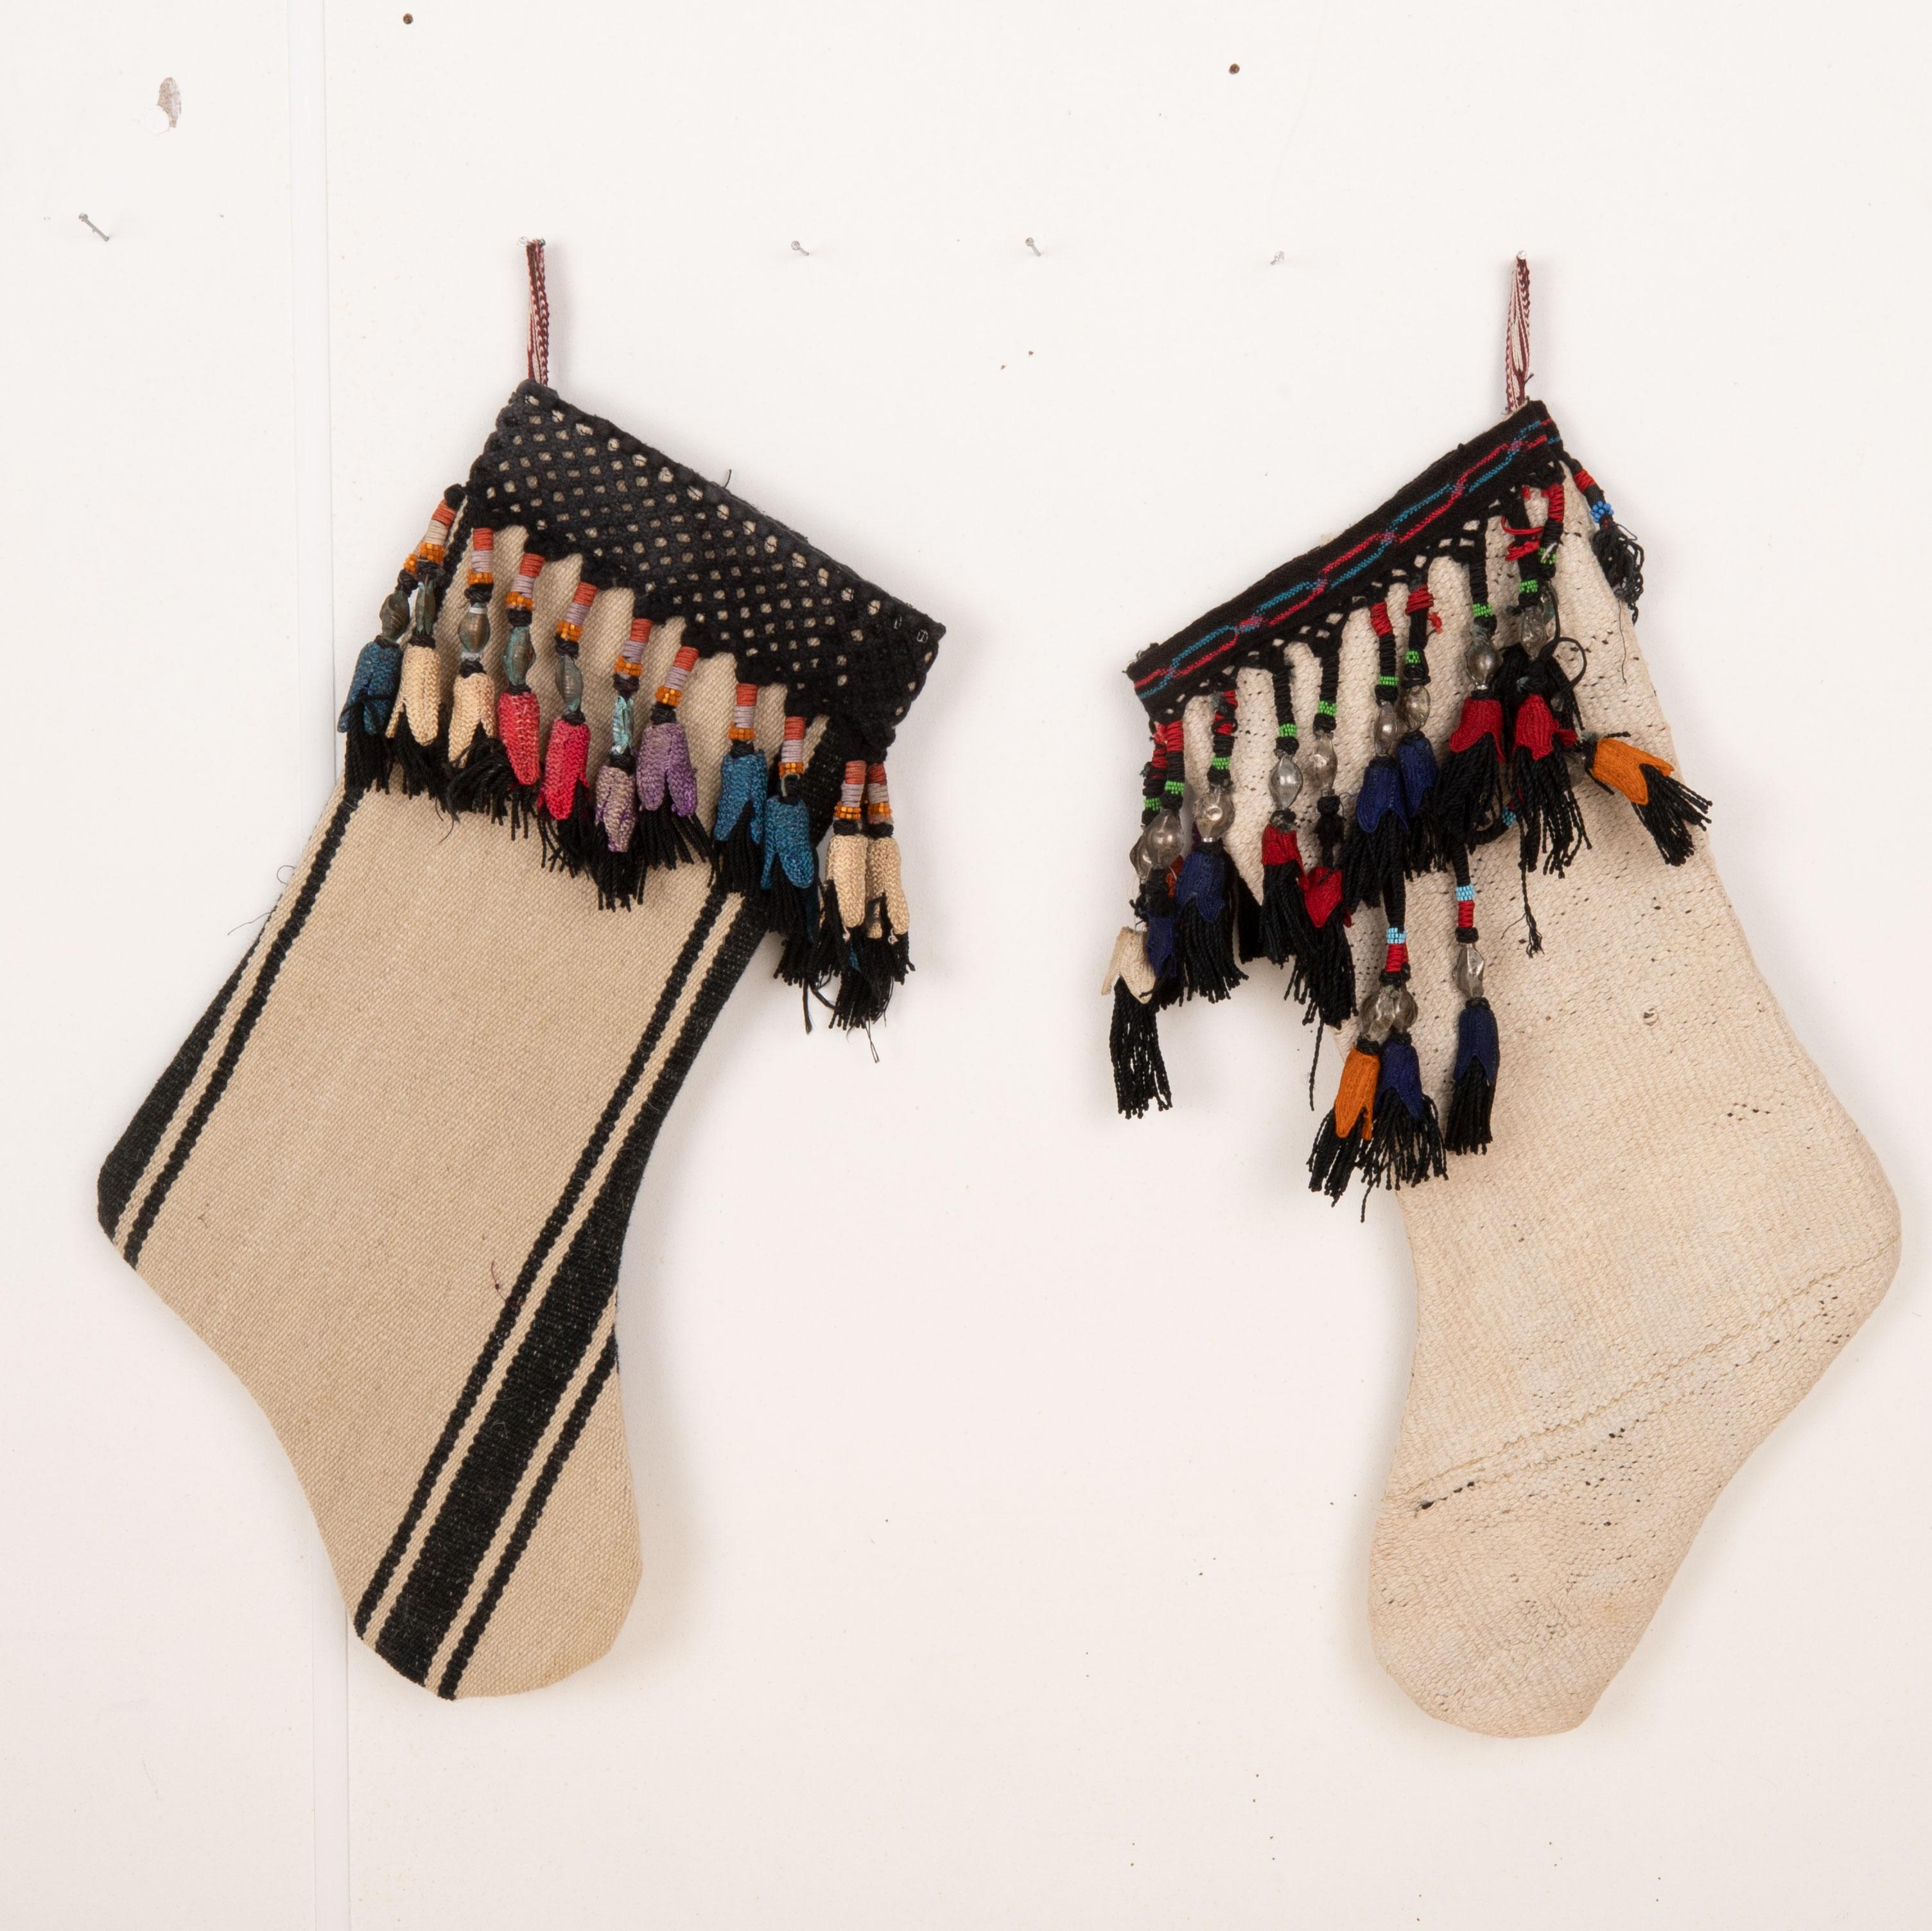 These Christmas Stockings were made from mid 20th C. Uzbek Velvet Fragments.

Please note these were made from vintage Turkish Kilim fragments.
